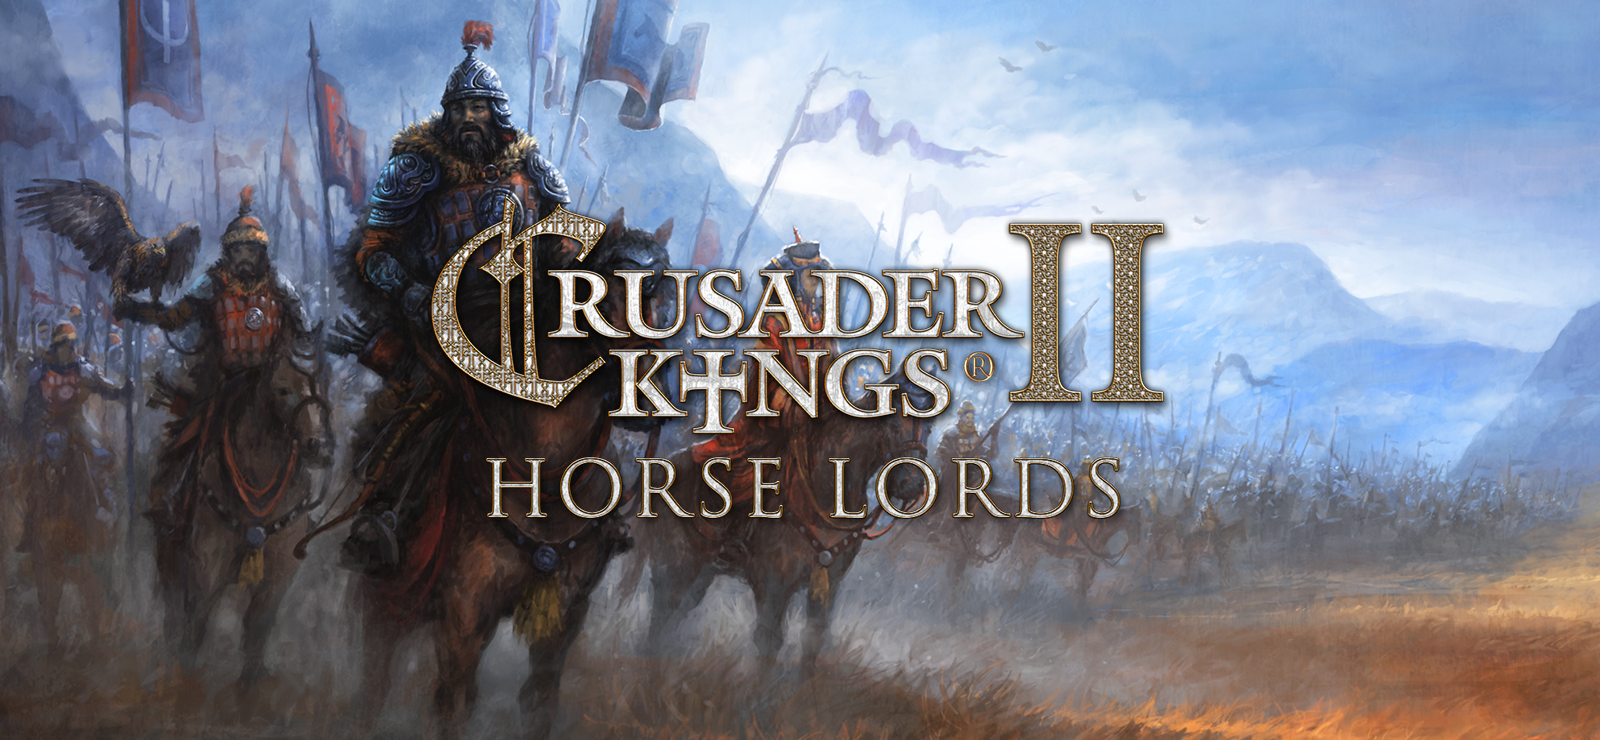 Content Pack - Crusader Kings II: Horse Lords